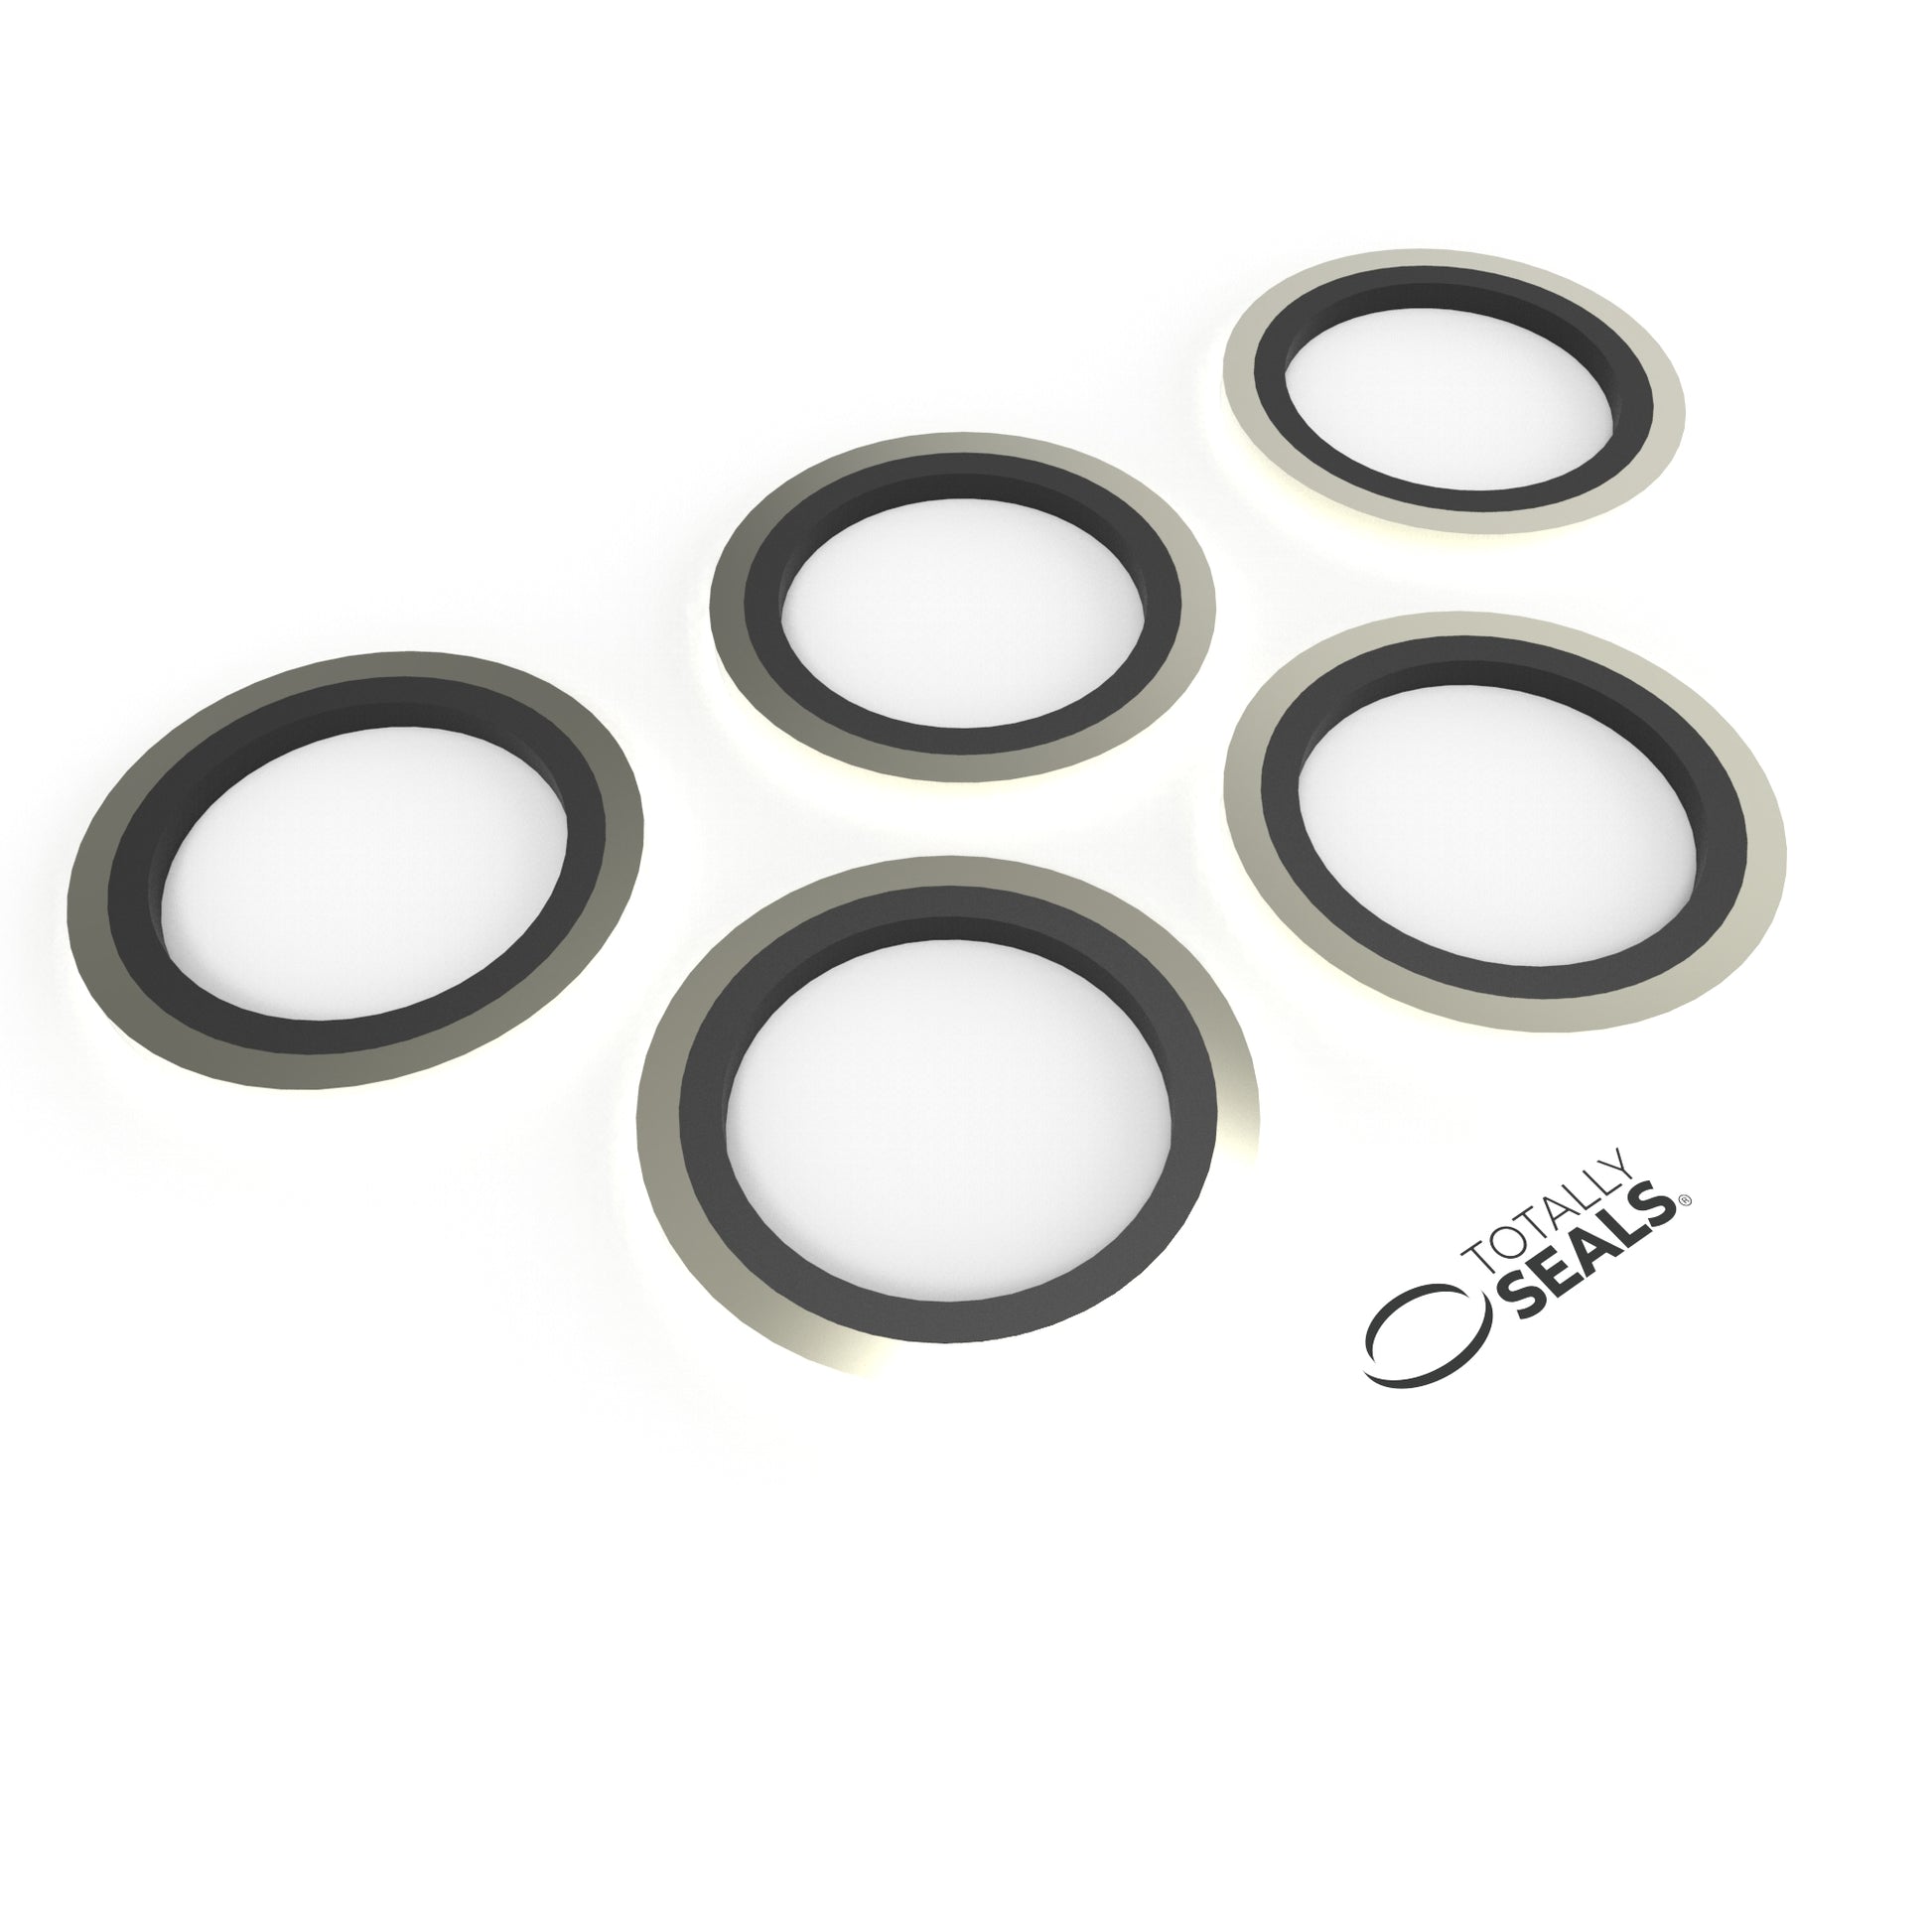 M22 Bonded Seals (Dowty Washers) - Totally Seals®